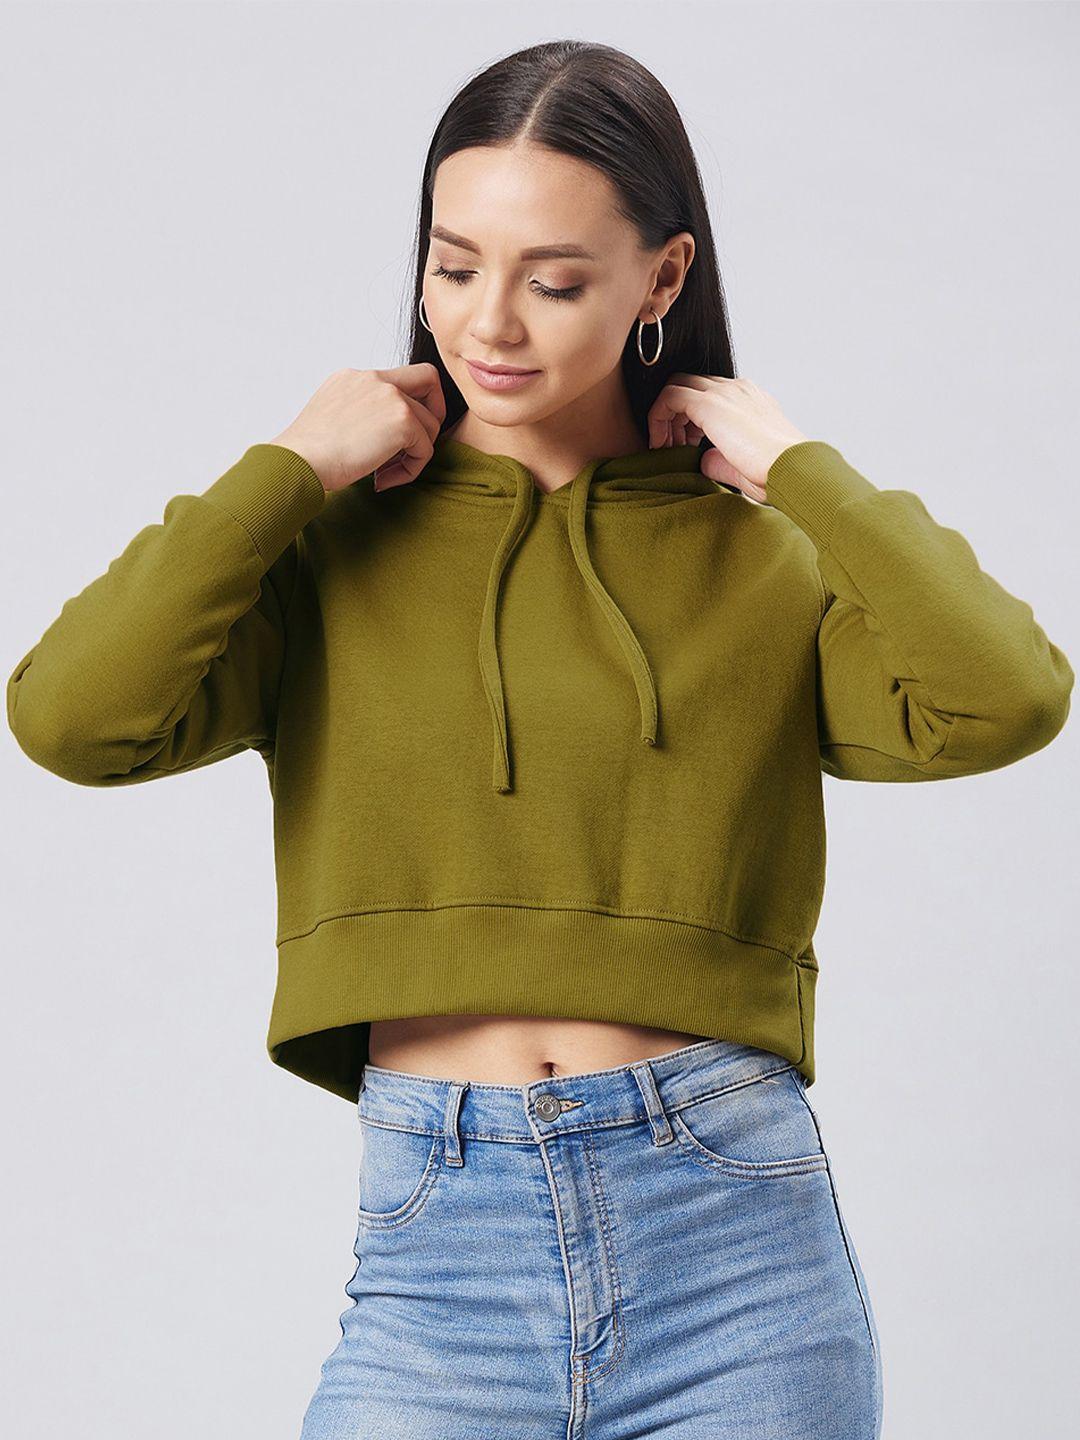 dolce-crudo-women-olive-green-solid-cropped-hooded-sweatshirt